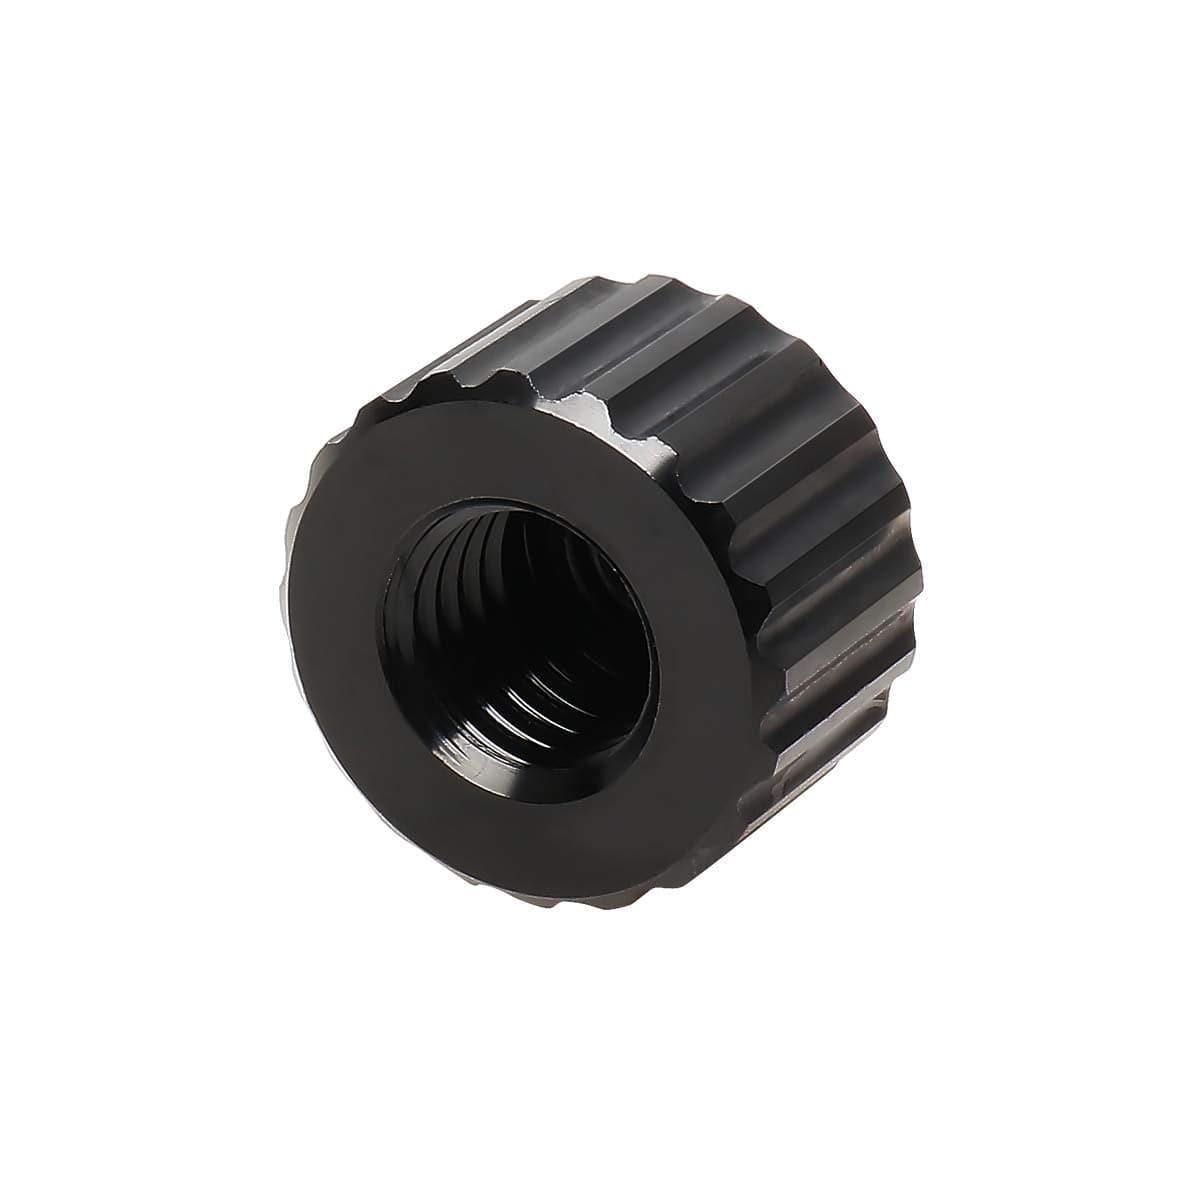 HUEPAR Adapter with 5/8-inch to 11 Female to 1/4-inch to 20 Male thread conversion for tripods and lasers, free shipping in the US6